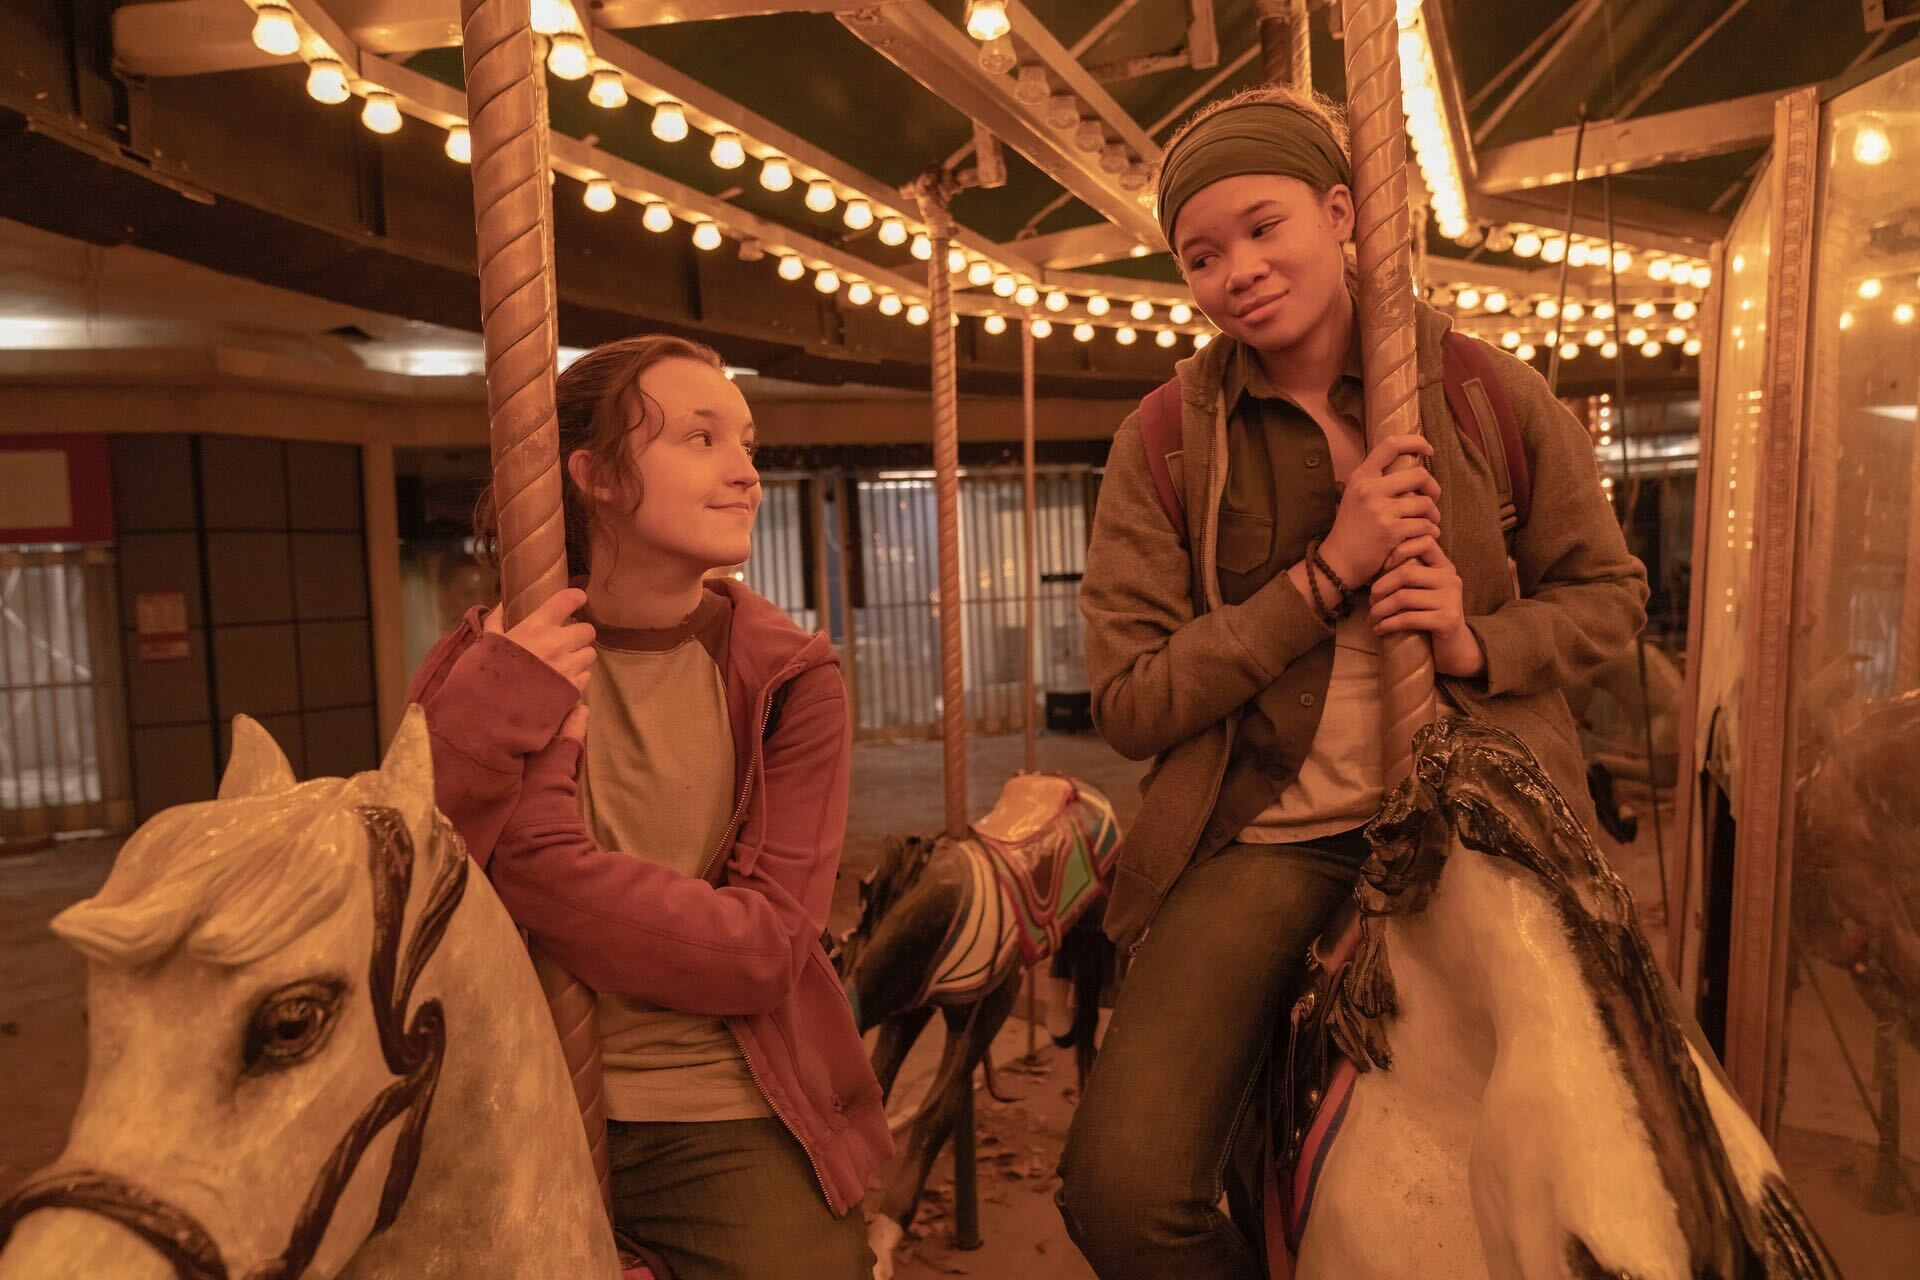 Bella Ramsey, left, and Storm Reid, right, look at each other with smiles as they ride fake carousel horses, bathed in the ride's warm light. 